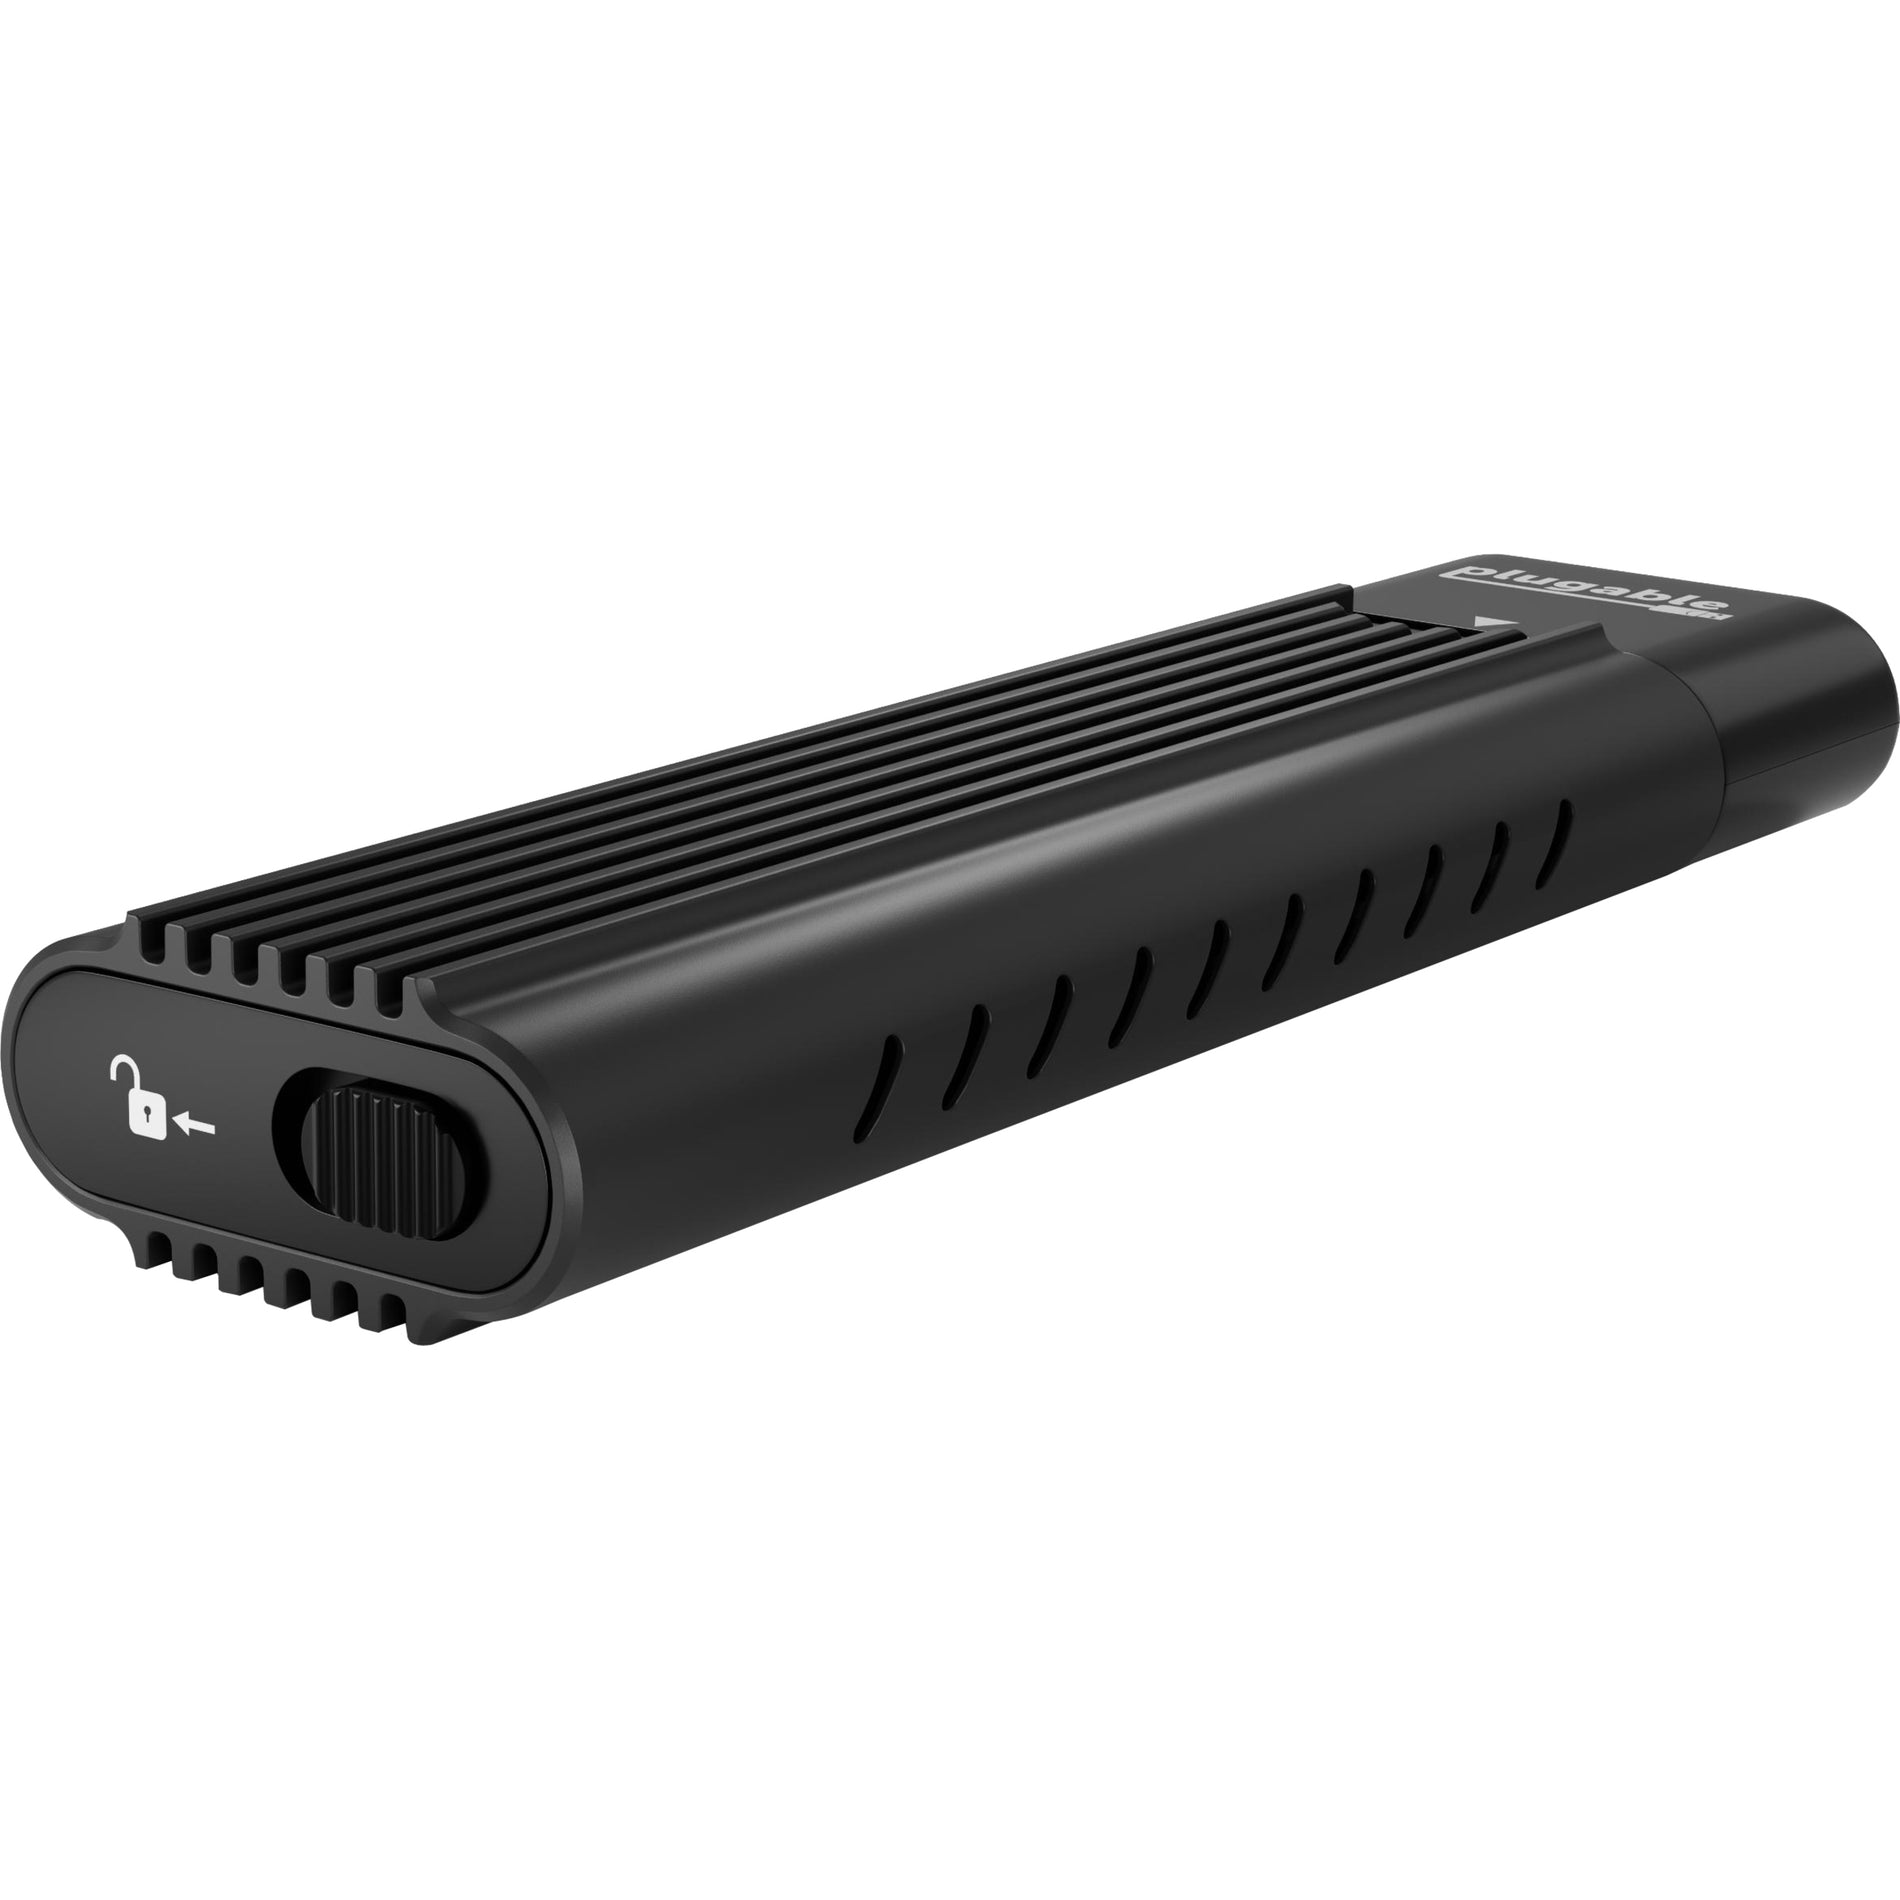 Plugable USBC-NVME USB C to M.2 NVMe Tool-free Enclosure, USB C and Thunderbolt 3 Compatible, up to USB 3.1 Gen 2 Speeds (10Gbps)